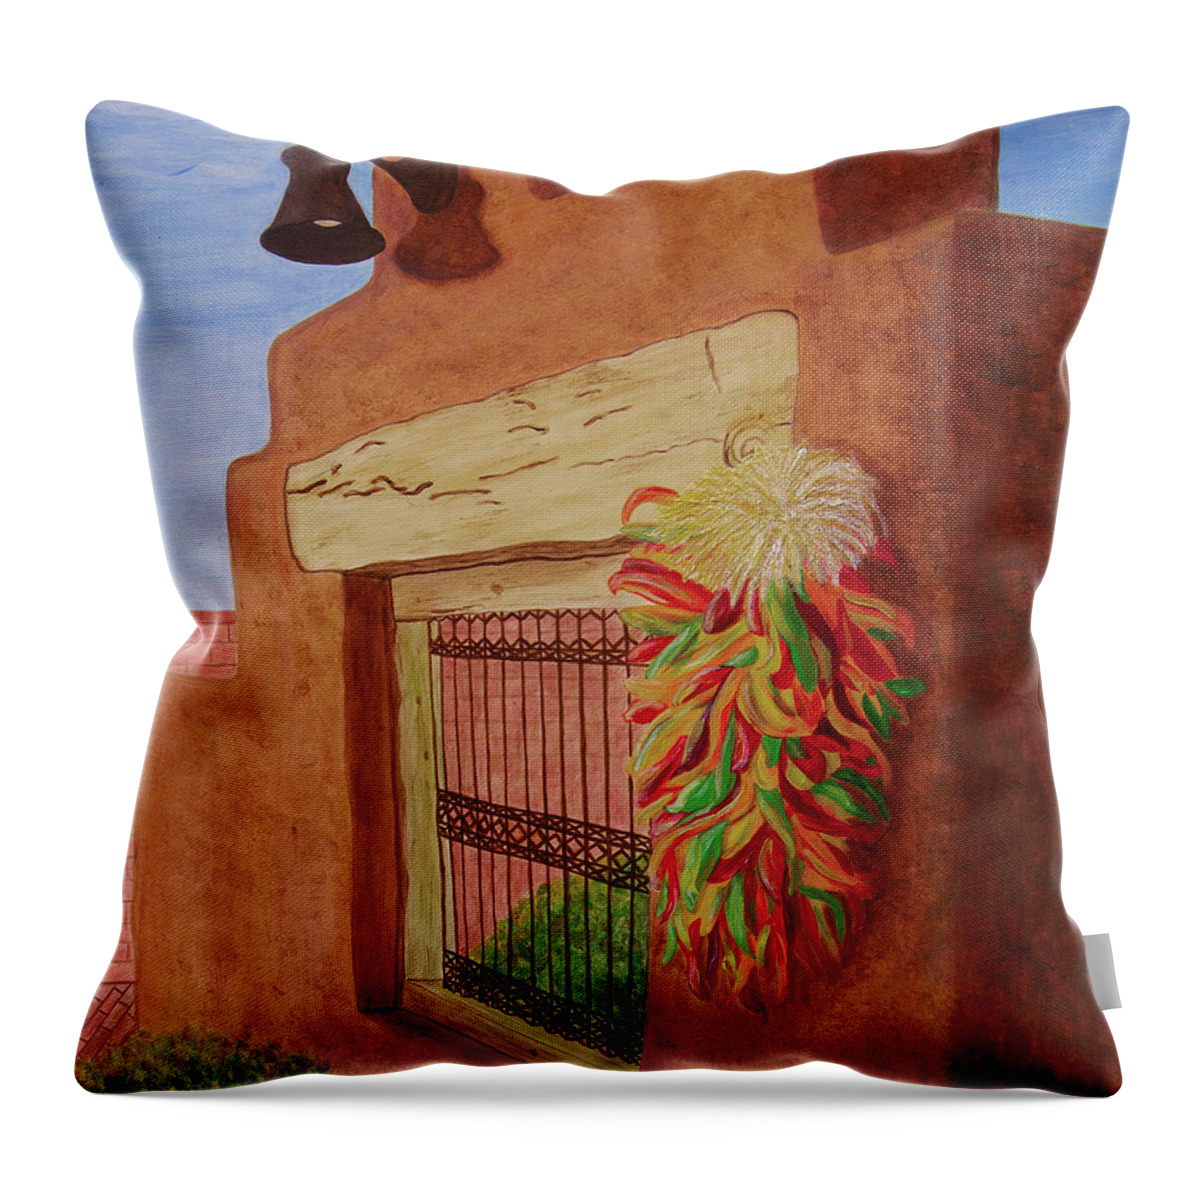 Southwest Throw Pillow featuring the painting Los Chiles by Donna Manaraze